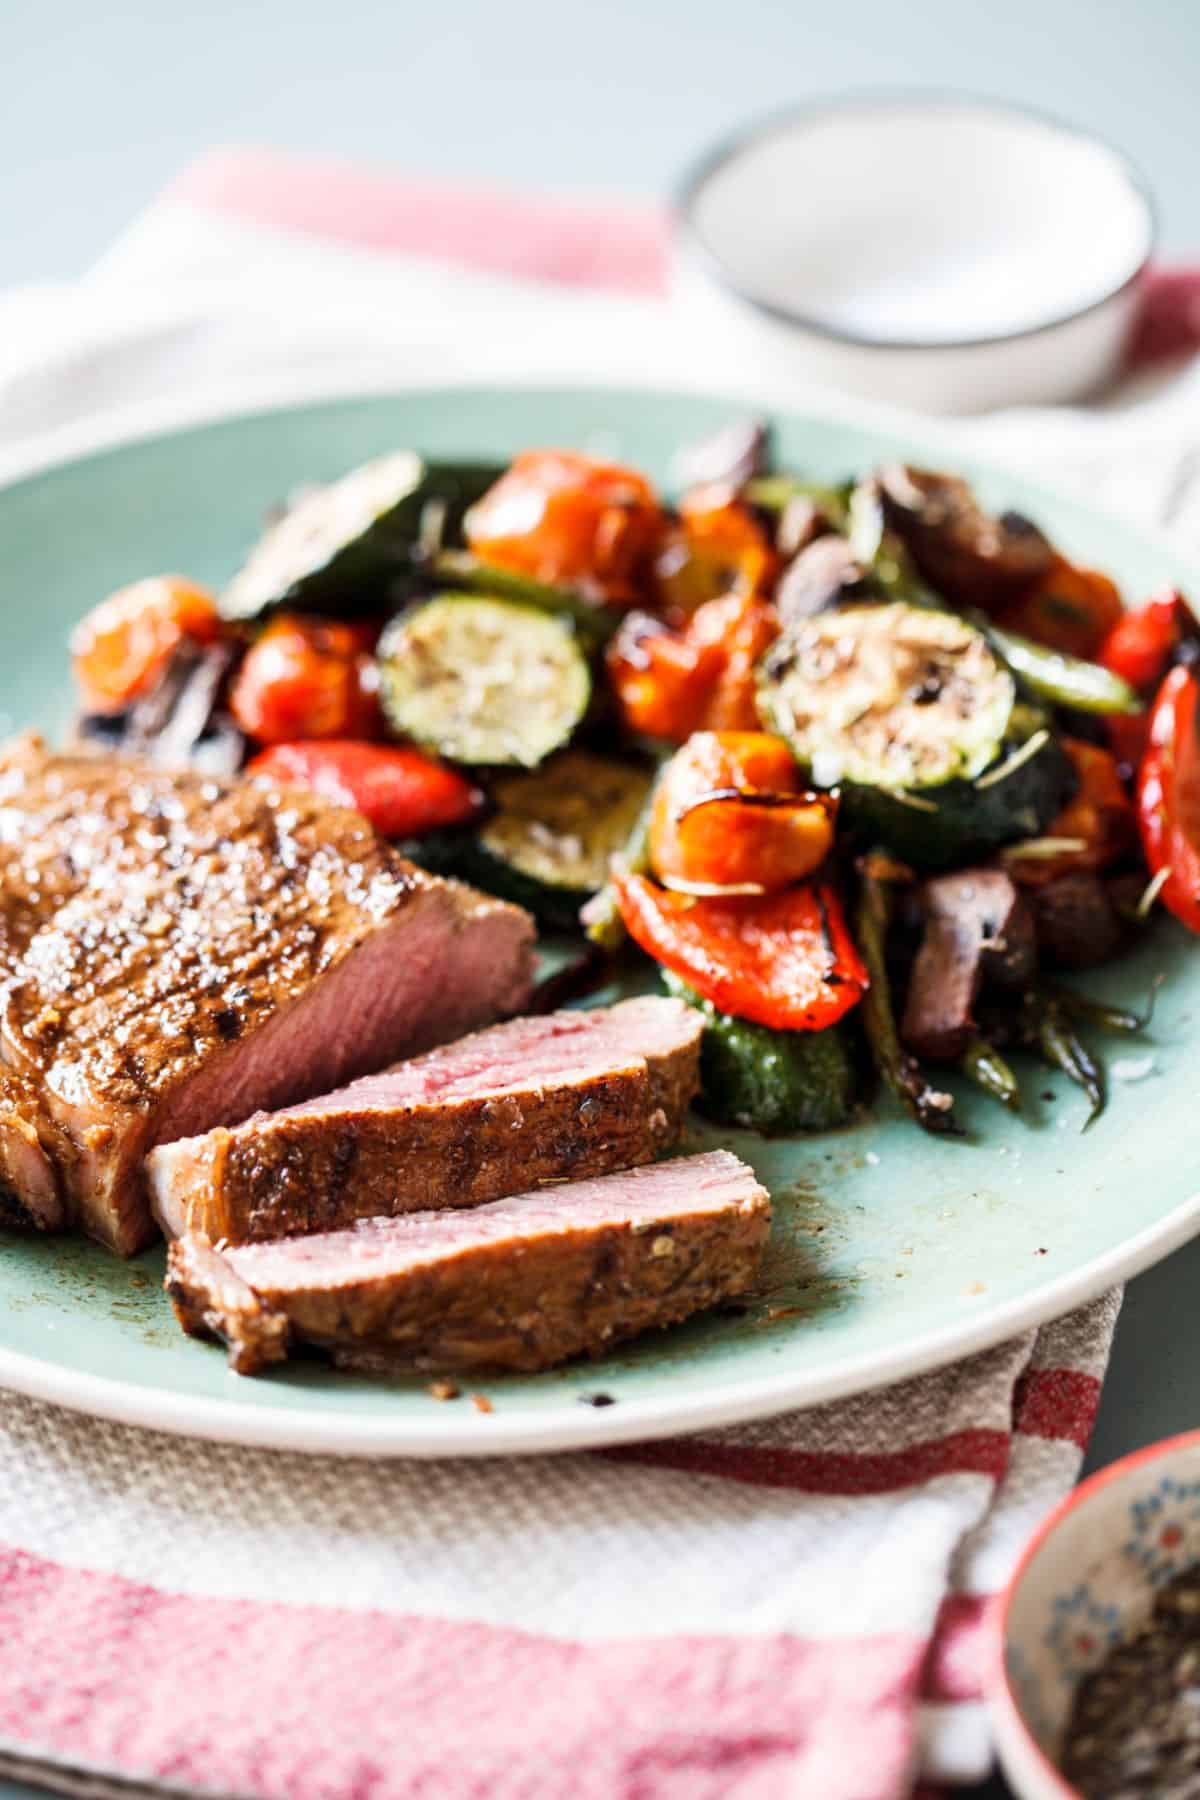 Garlic-Lime Steaks With Roasted Vegetables on a blue plate.